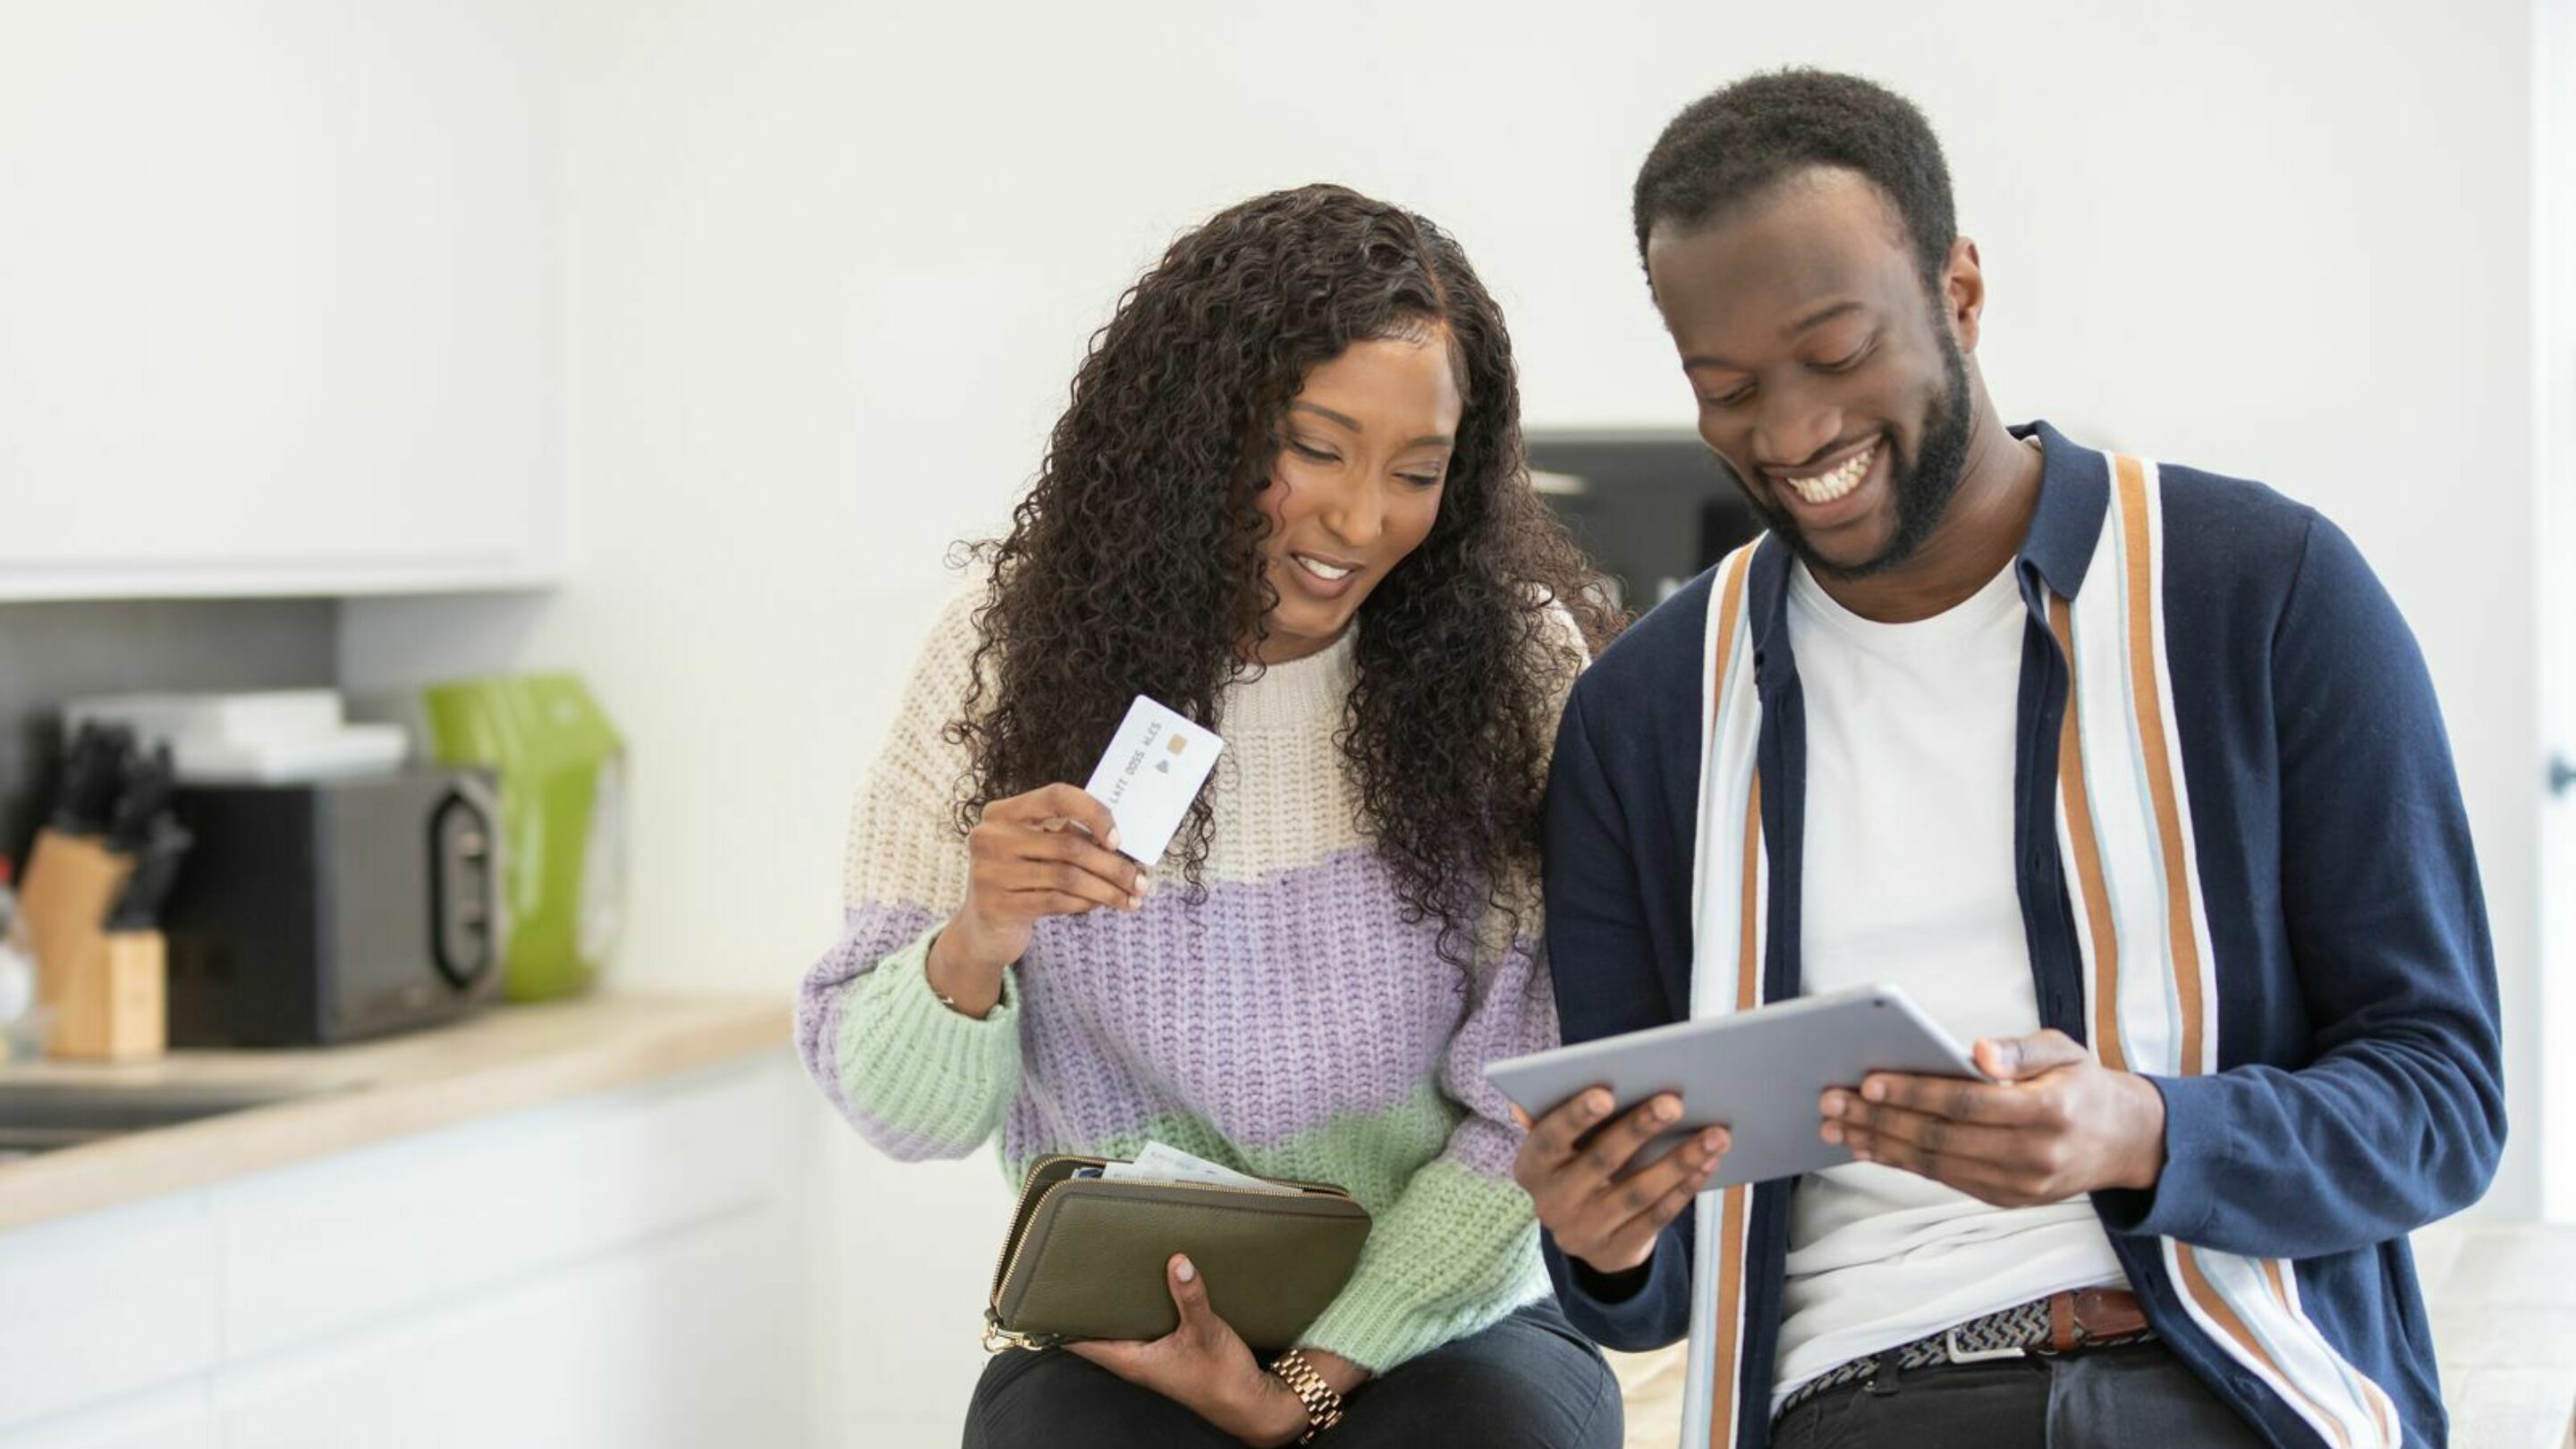 A young black couple, sitting in their kitchen. She is holding a card and purse, and he's sat next to her looking at a computer tablet. They're both smiling candidly.